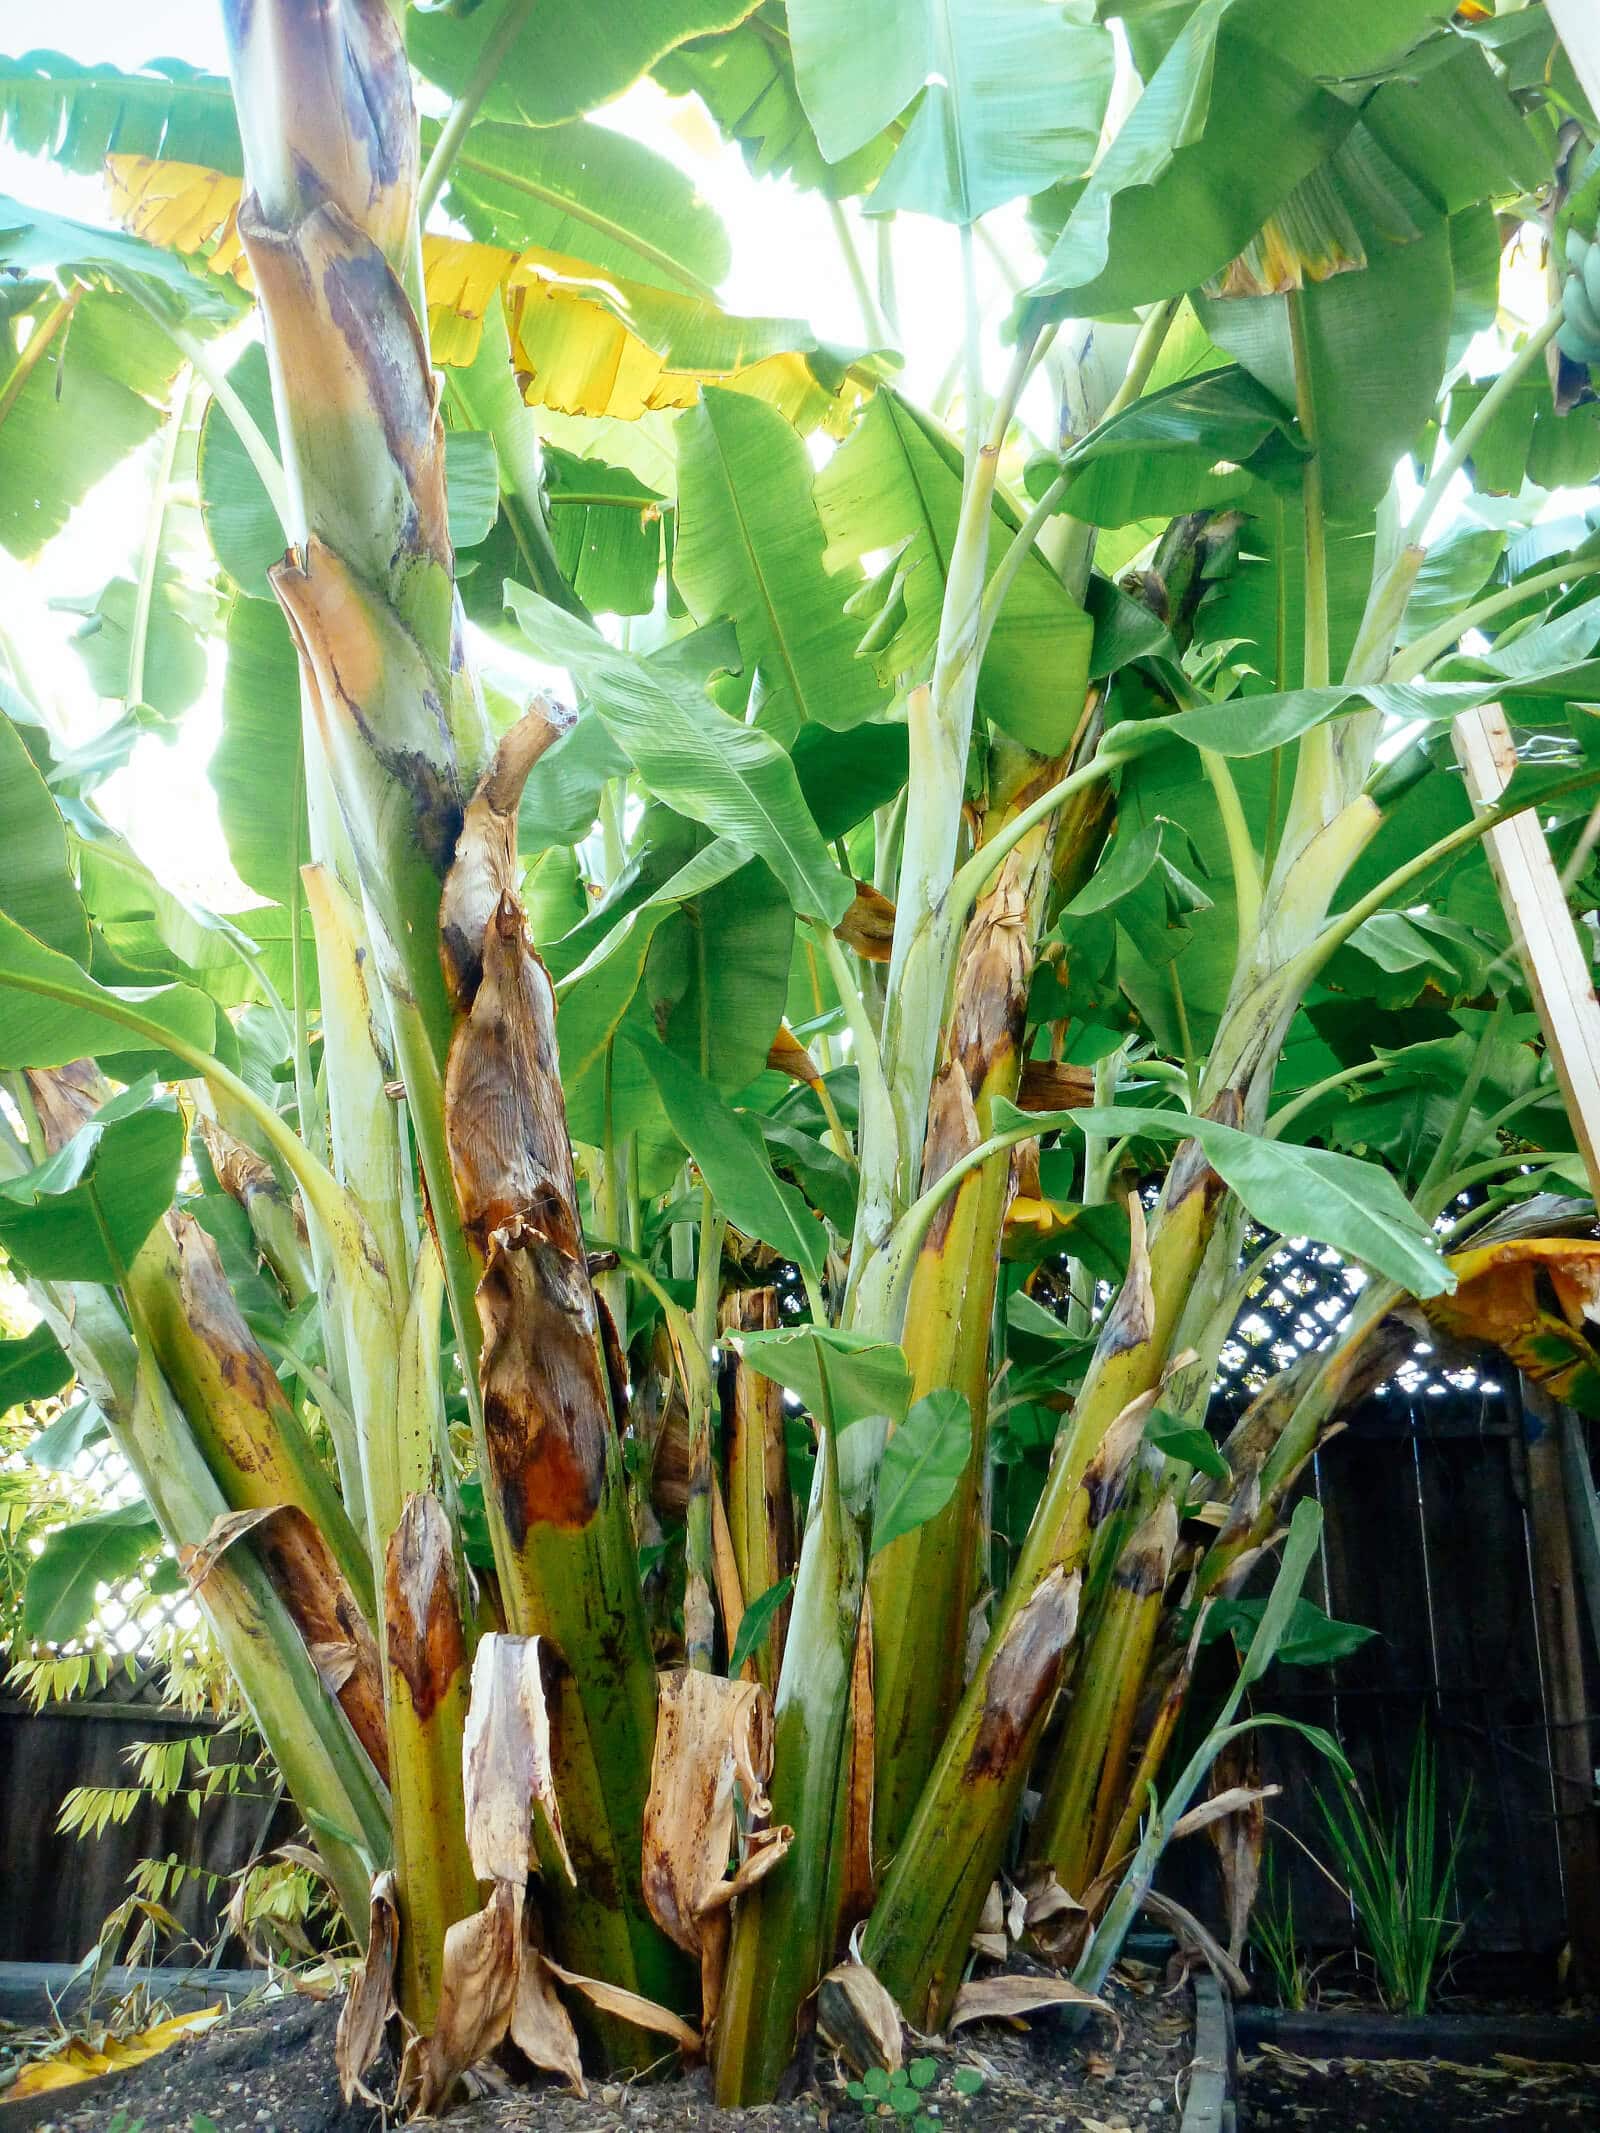 Banana plants (shoots) can grow in clusters and look like a large tree